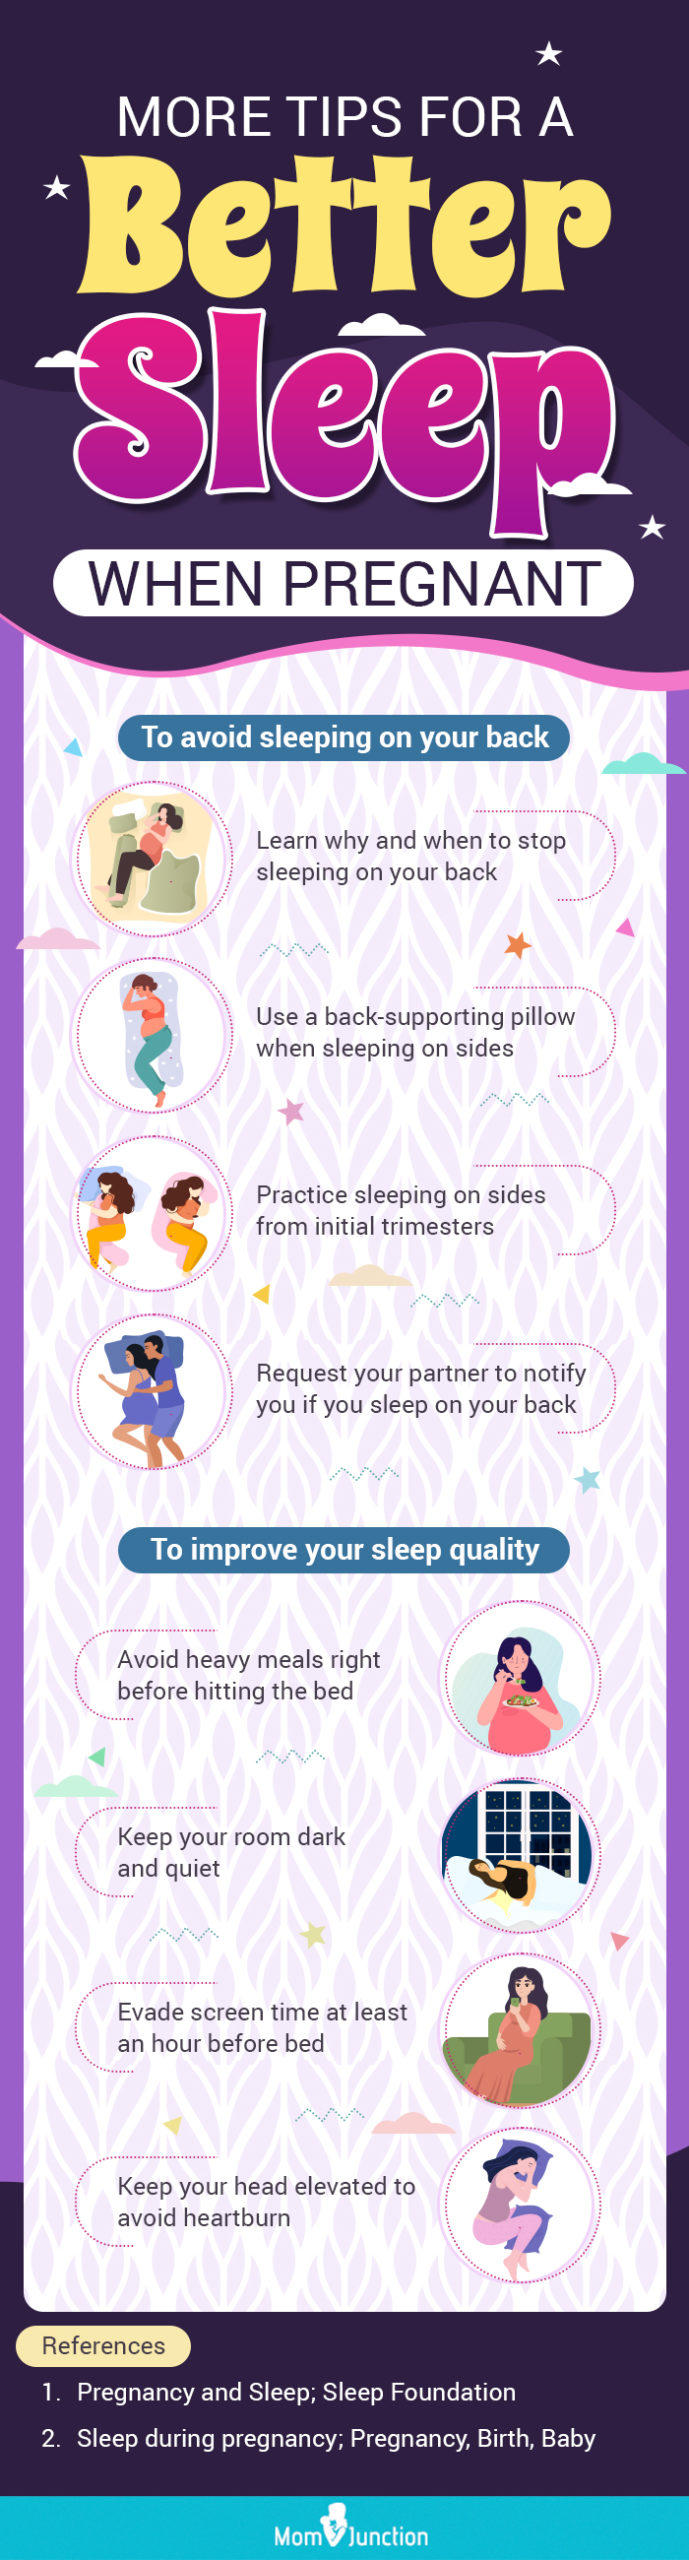 Sleeping on Your Back While Pregnant: Is It Safe?